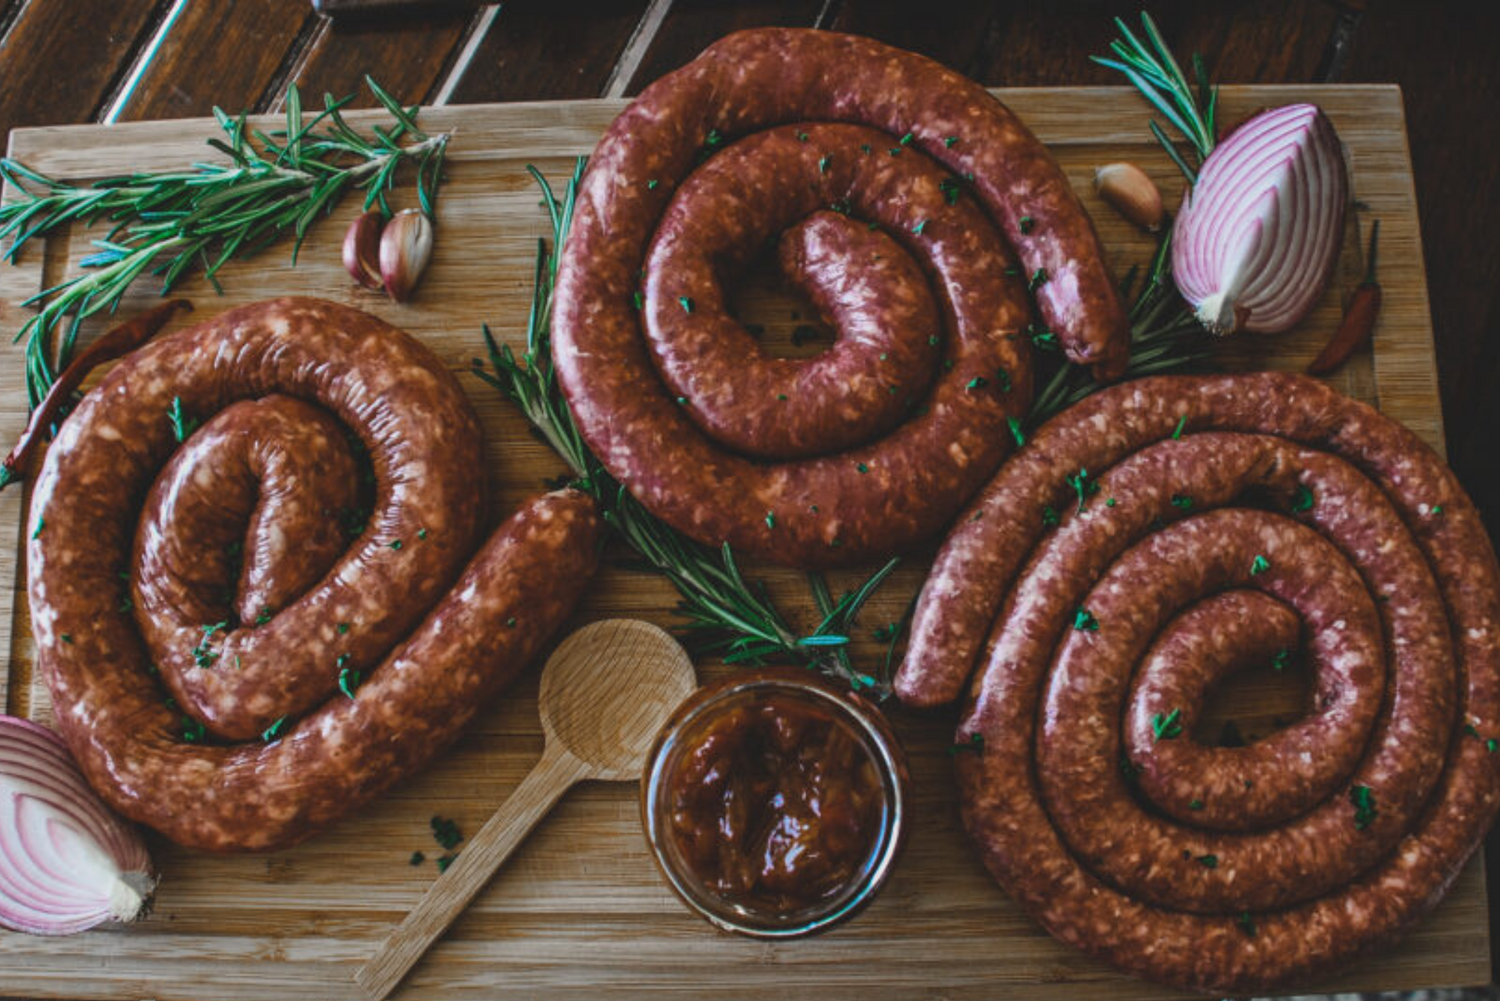 South African Boerewors from Scratch (pronounced boo-ruh-vors)